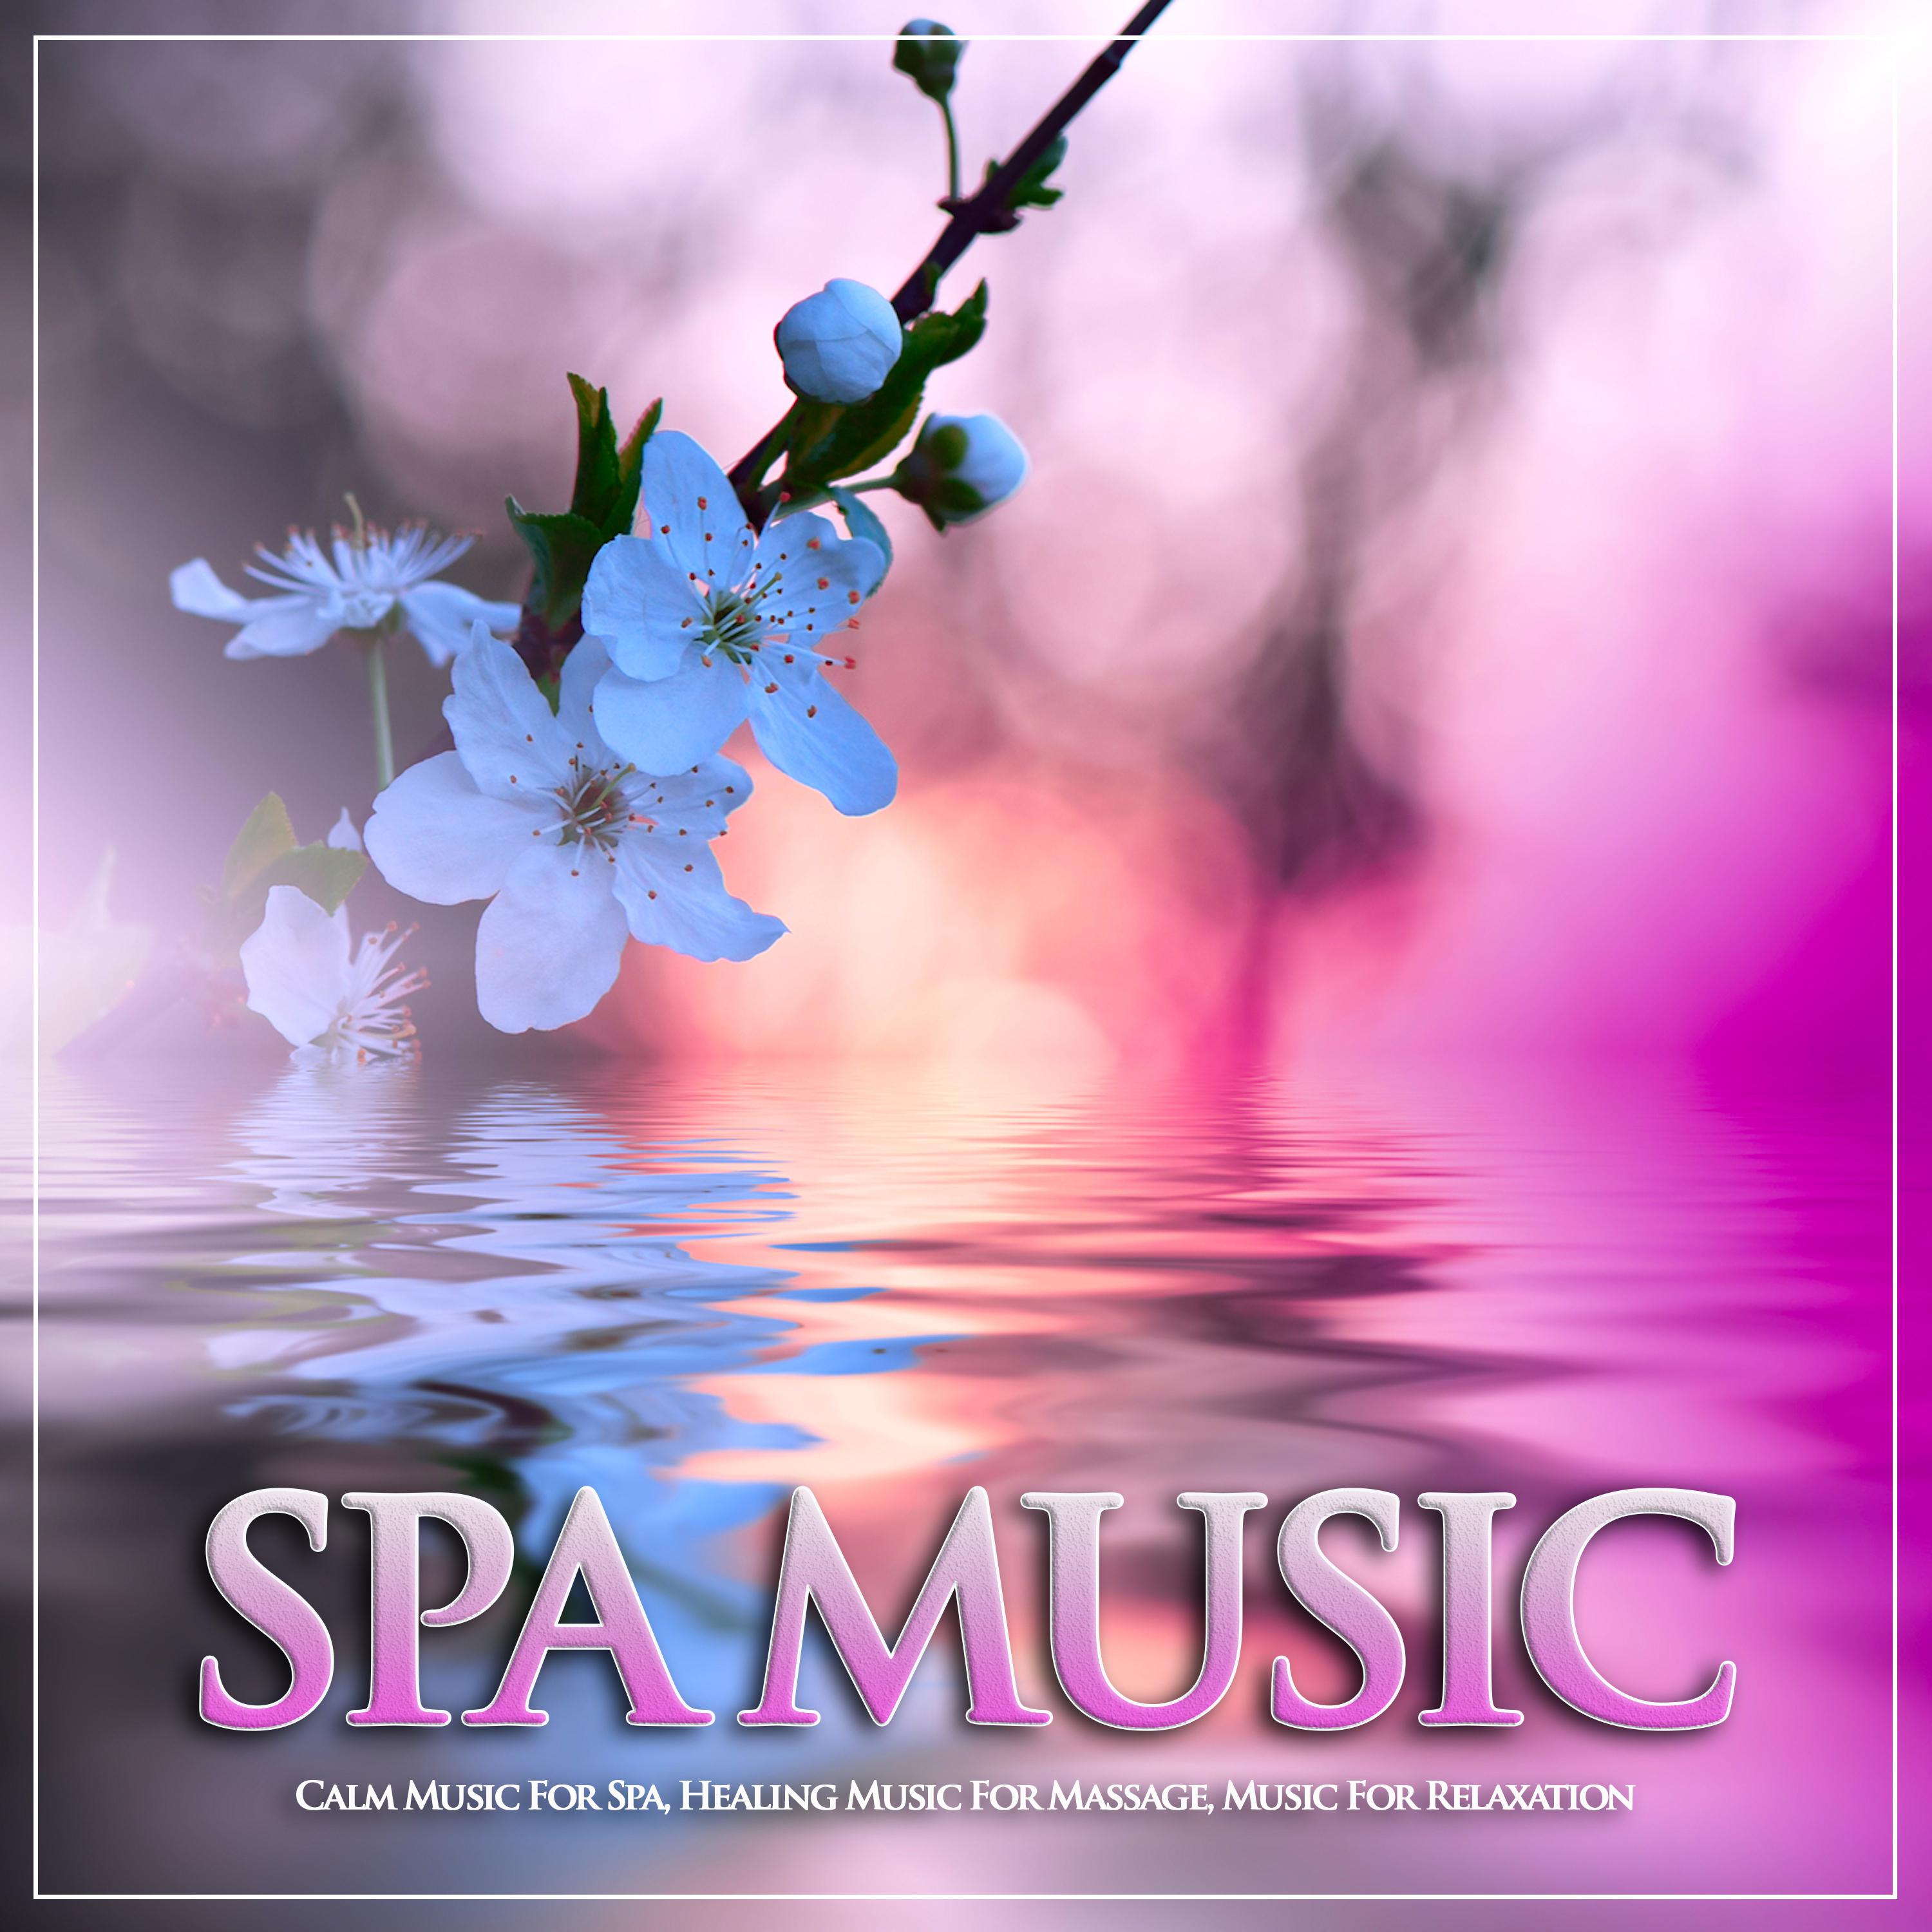 Background Music For A Relaxing Massage